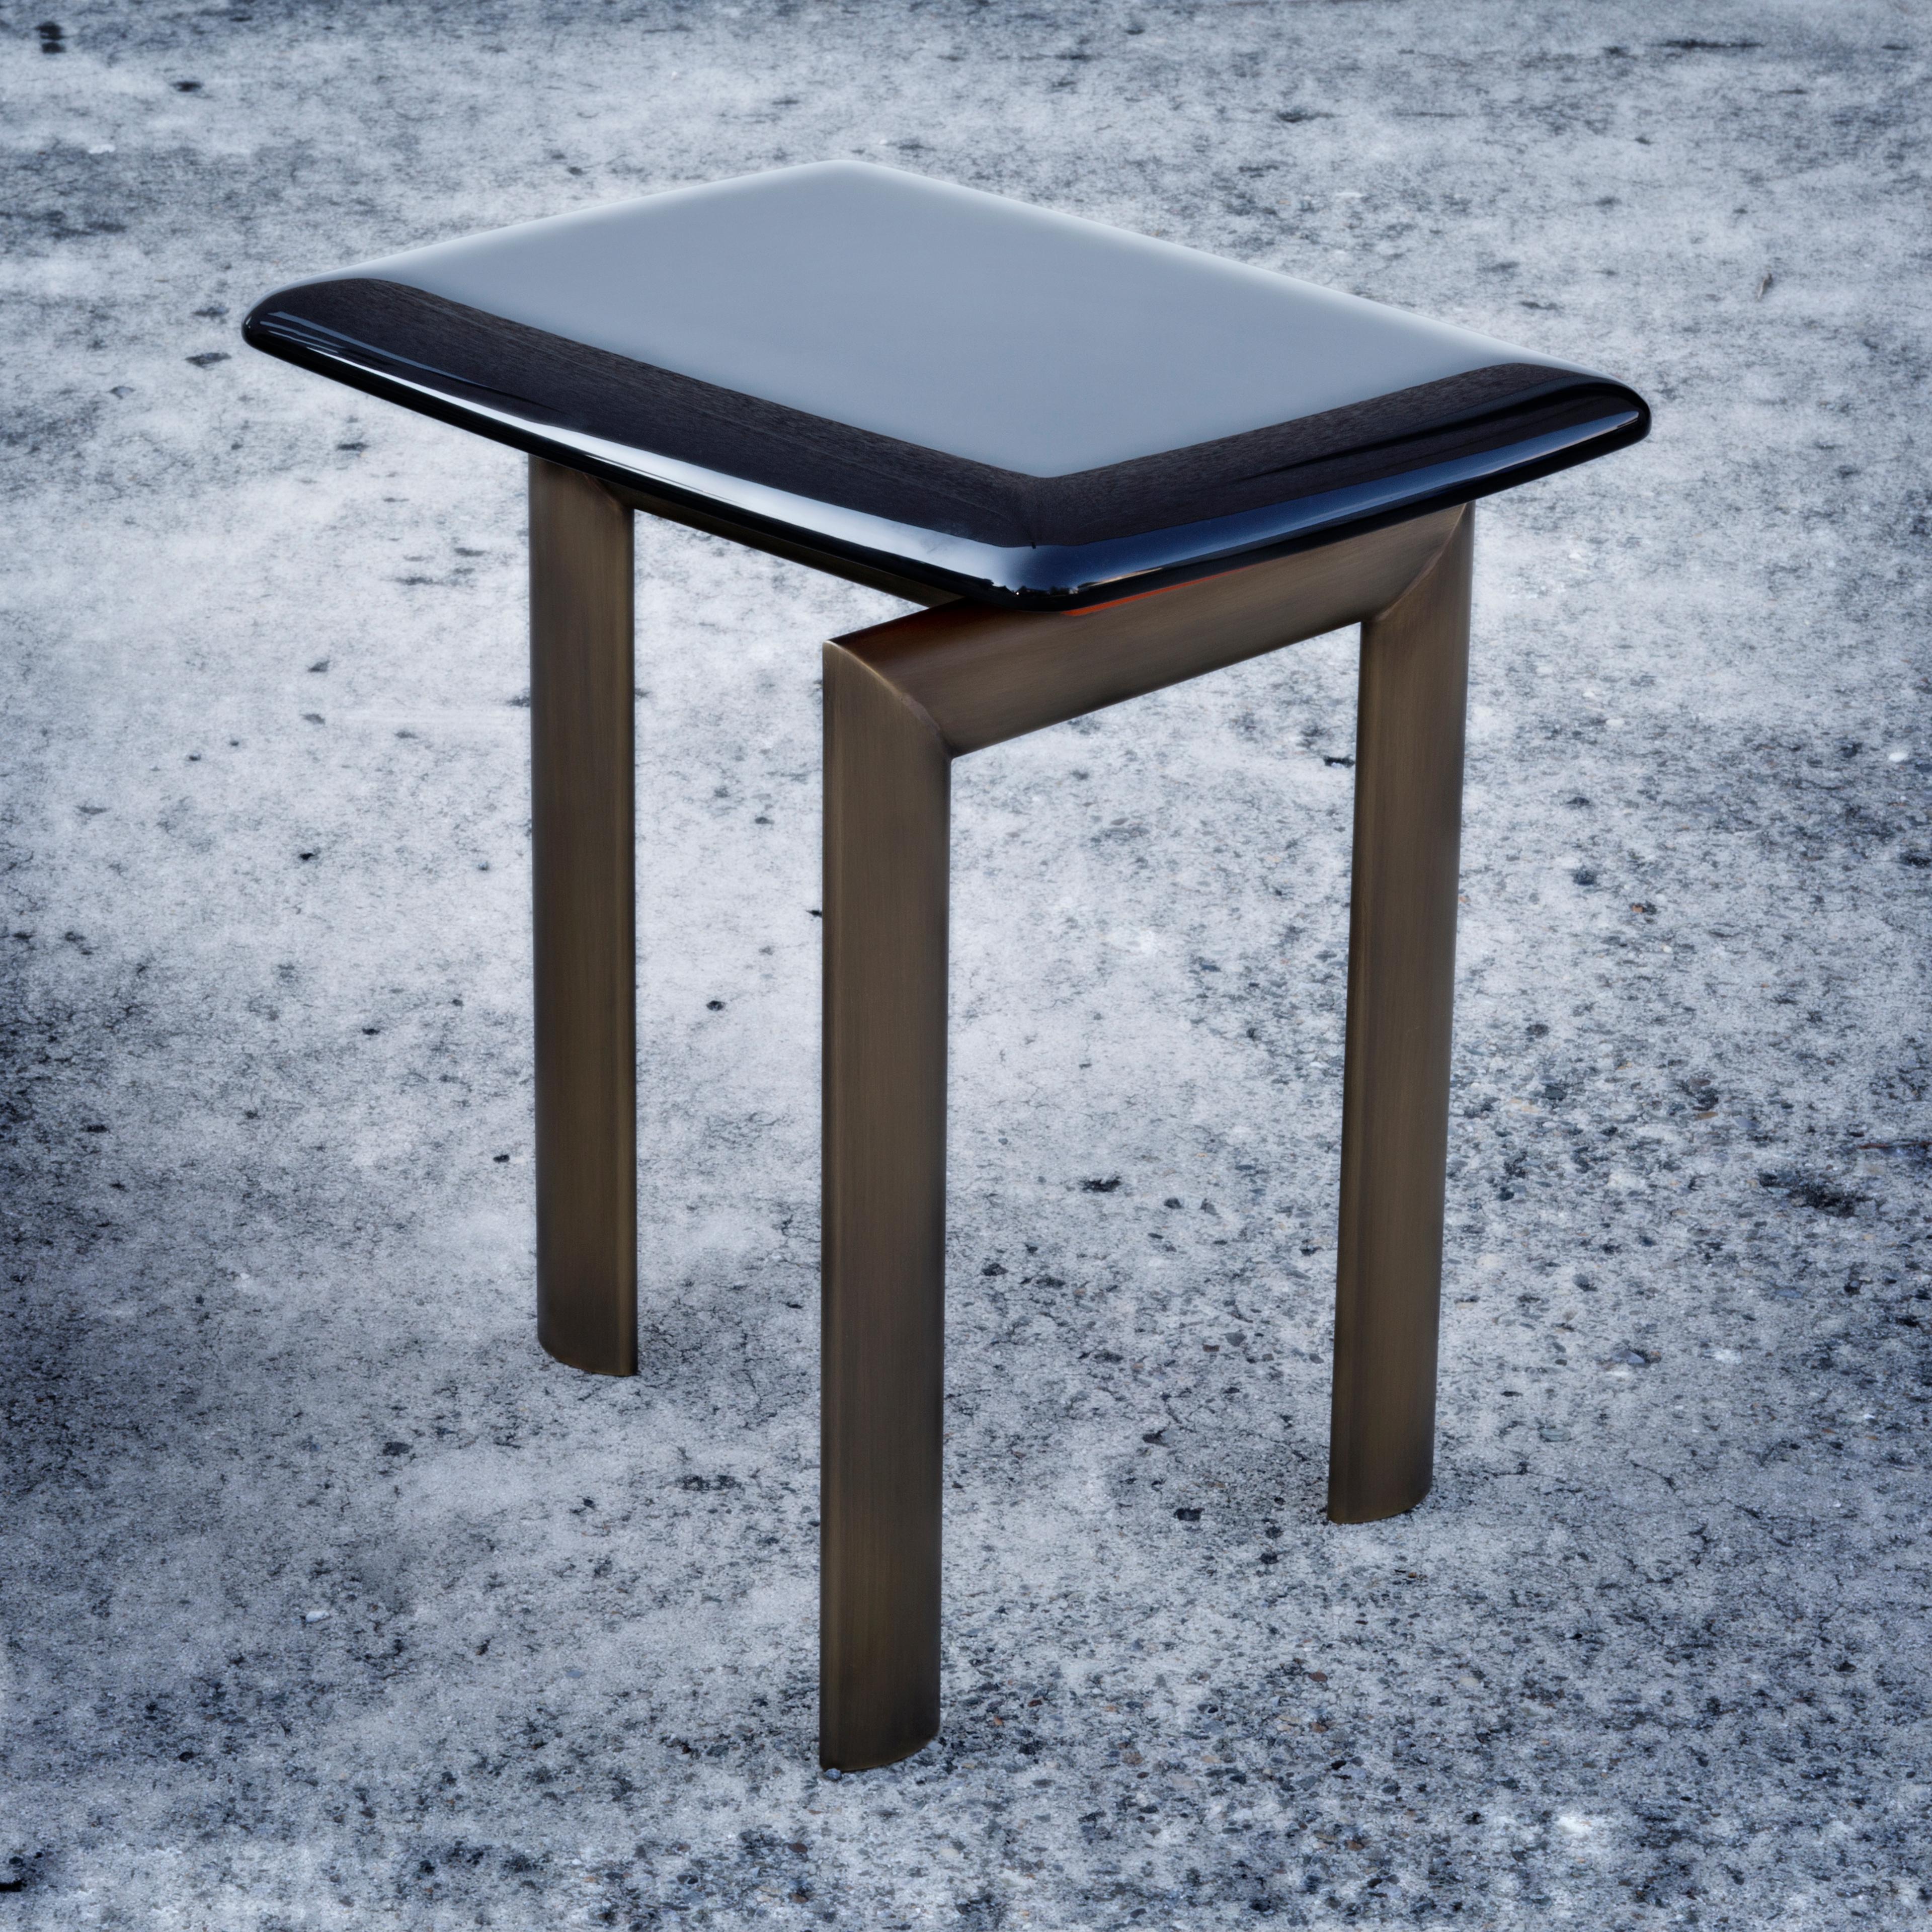 Sasso in Italian means stone. This table (which we offer here in the side table version) was so named because the first model was made with a marble top. Casa Casati has a large variety of Sasso tables in its catalogue, of different sizes and